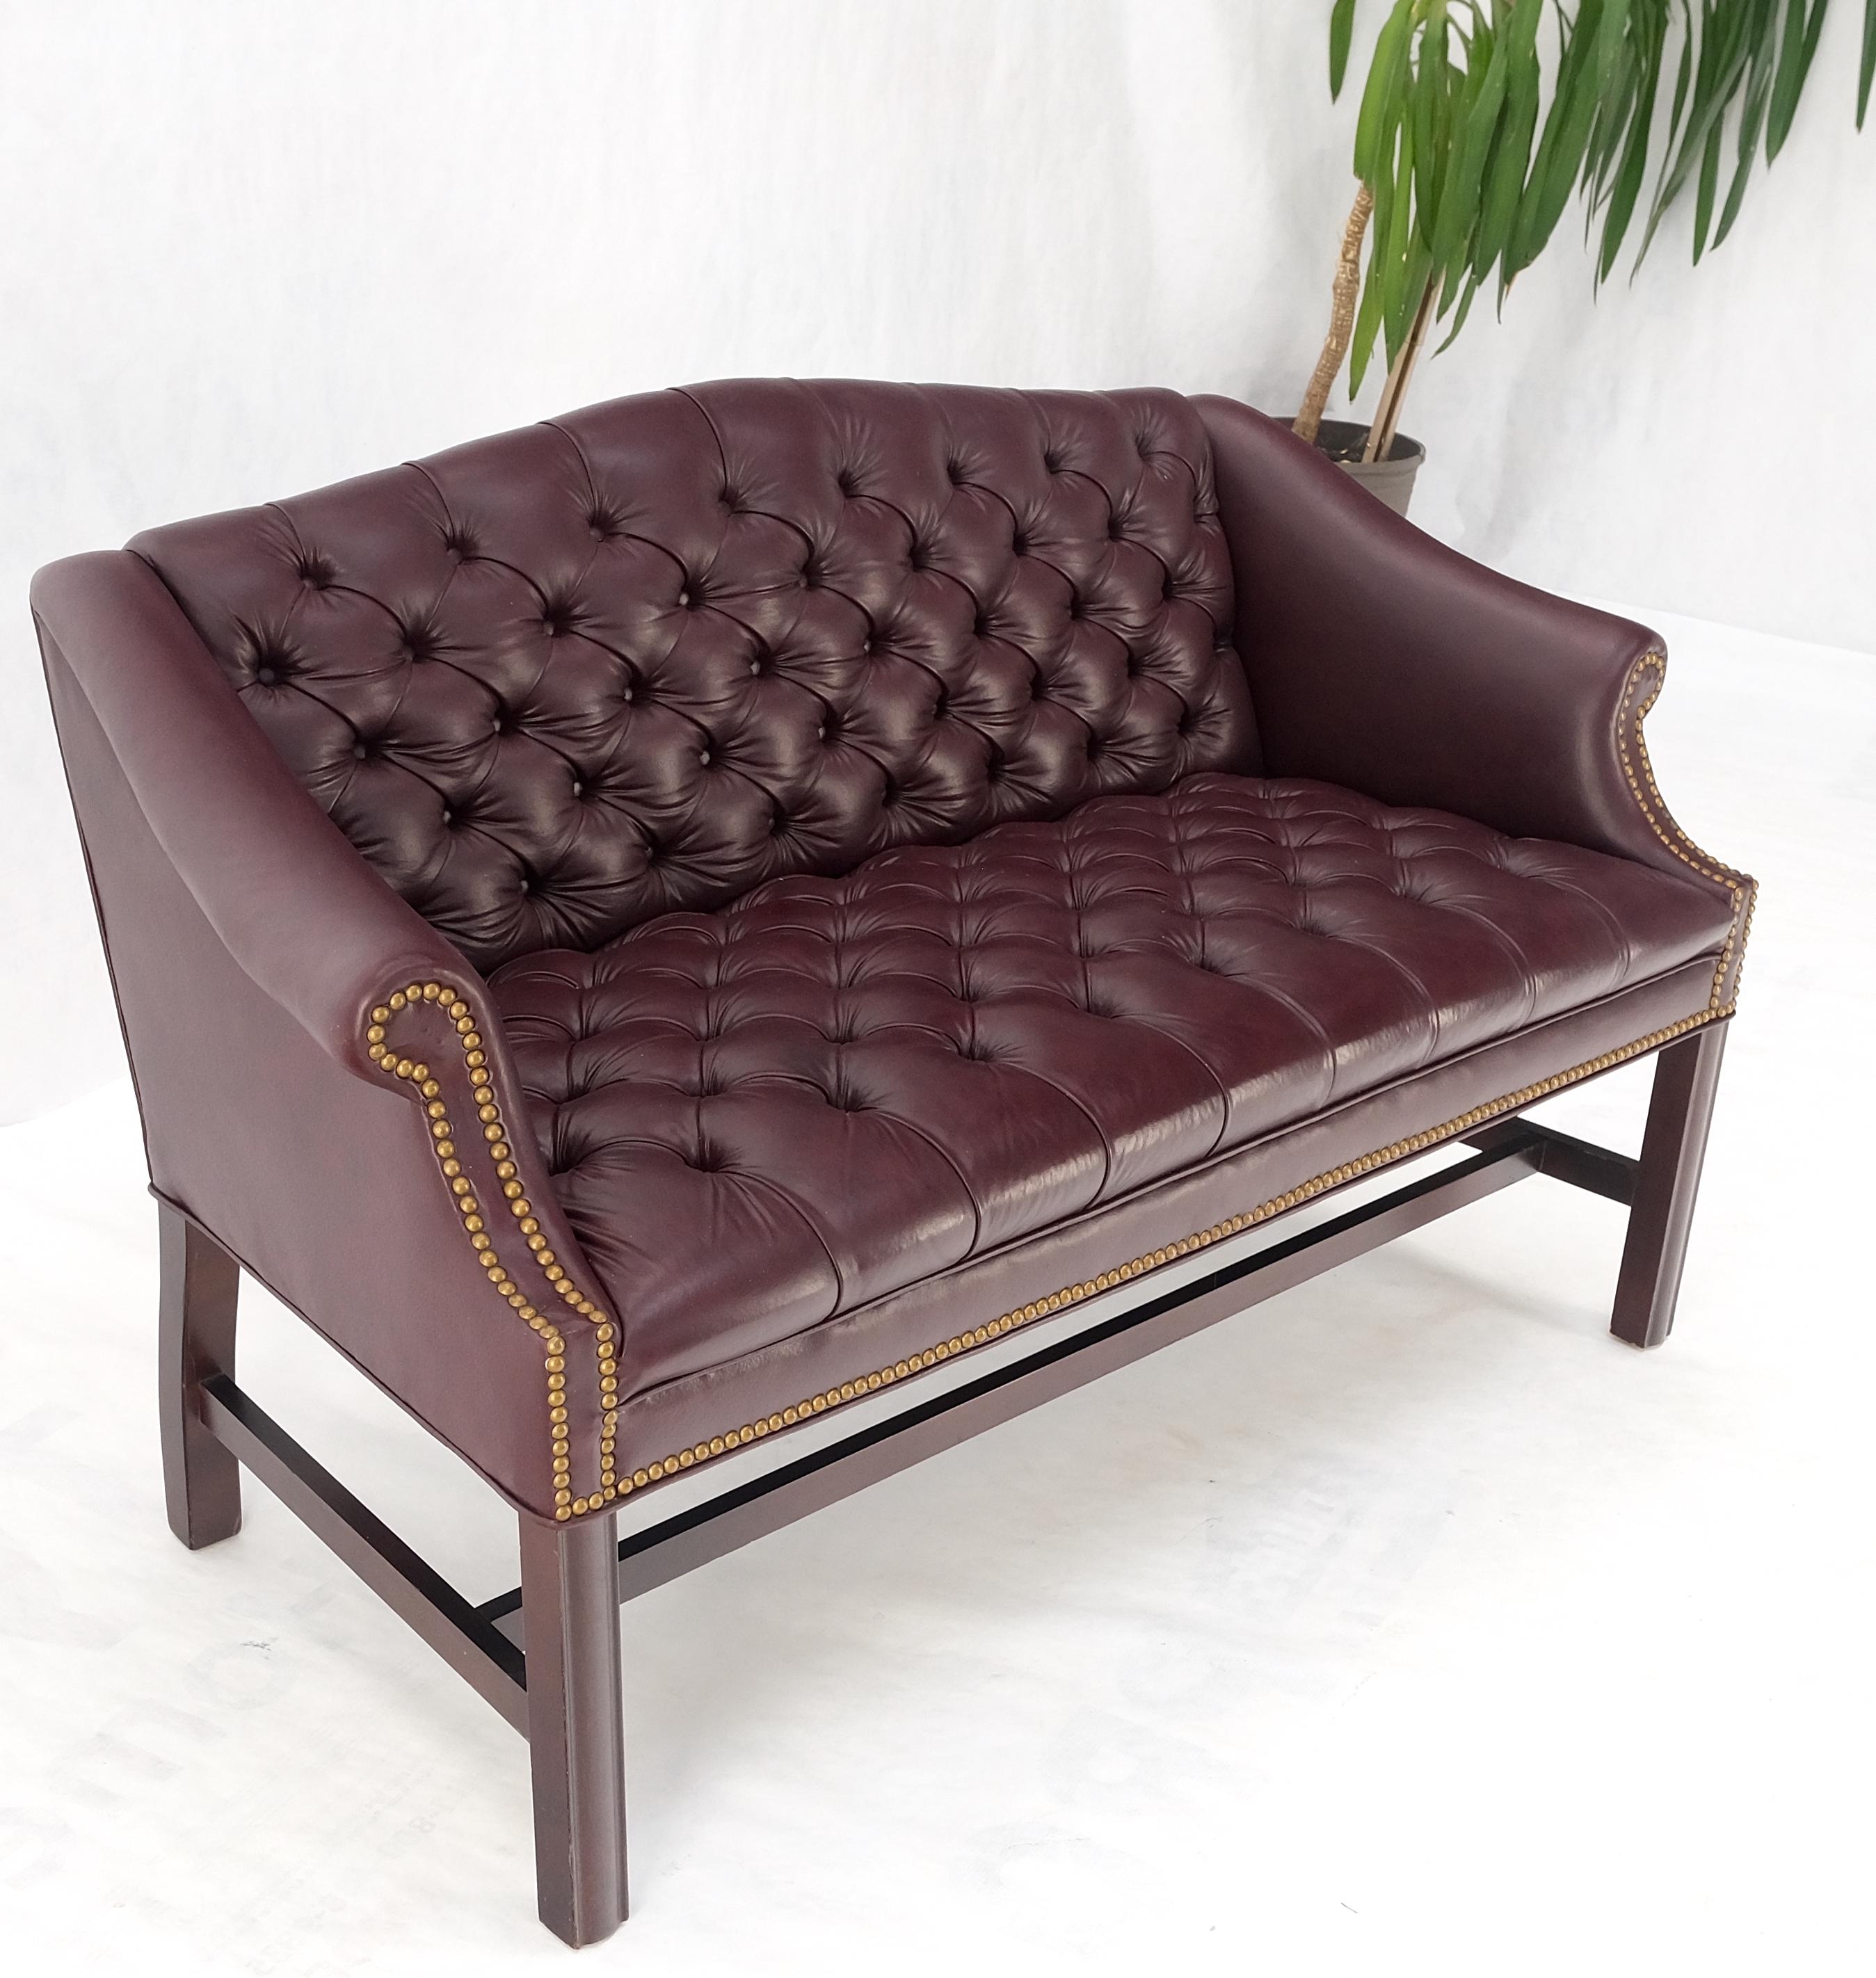 Tufted Burgundy Leather Federal Style Settee Love Seat Couch Sofa MINT! For Sale 4